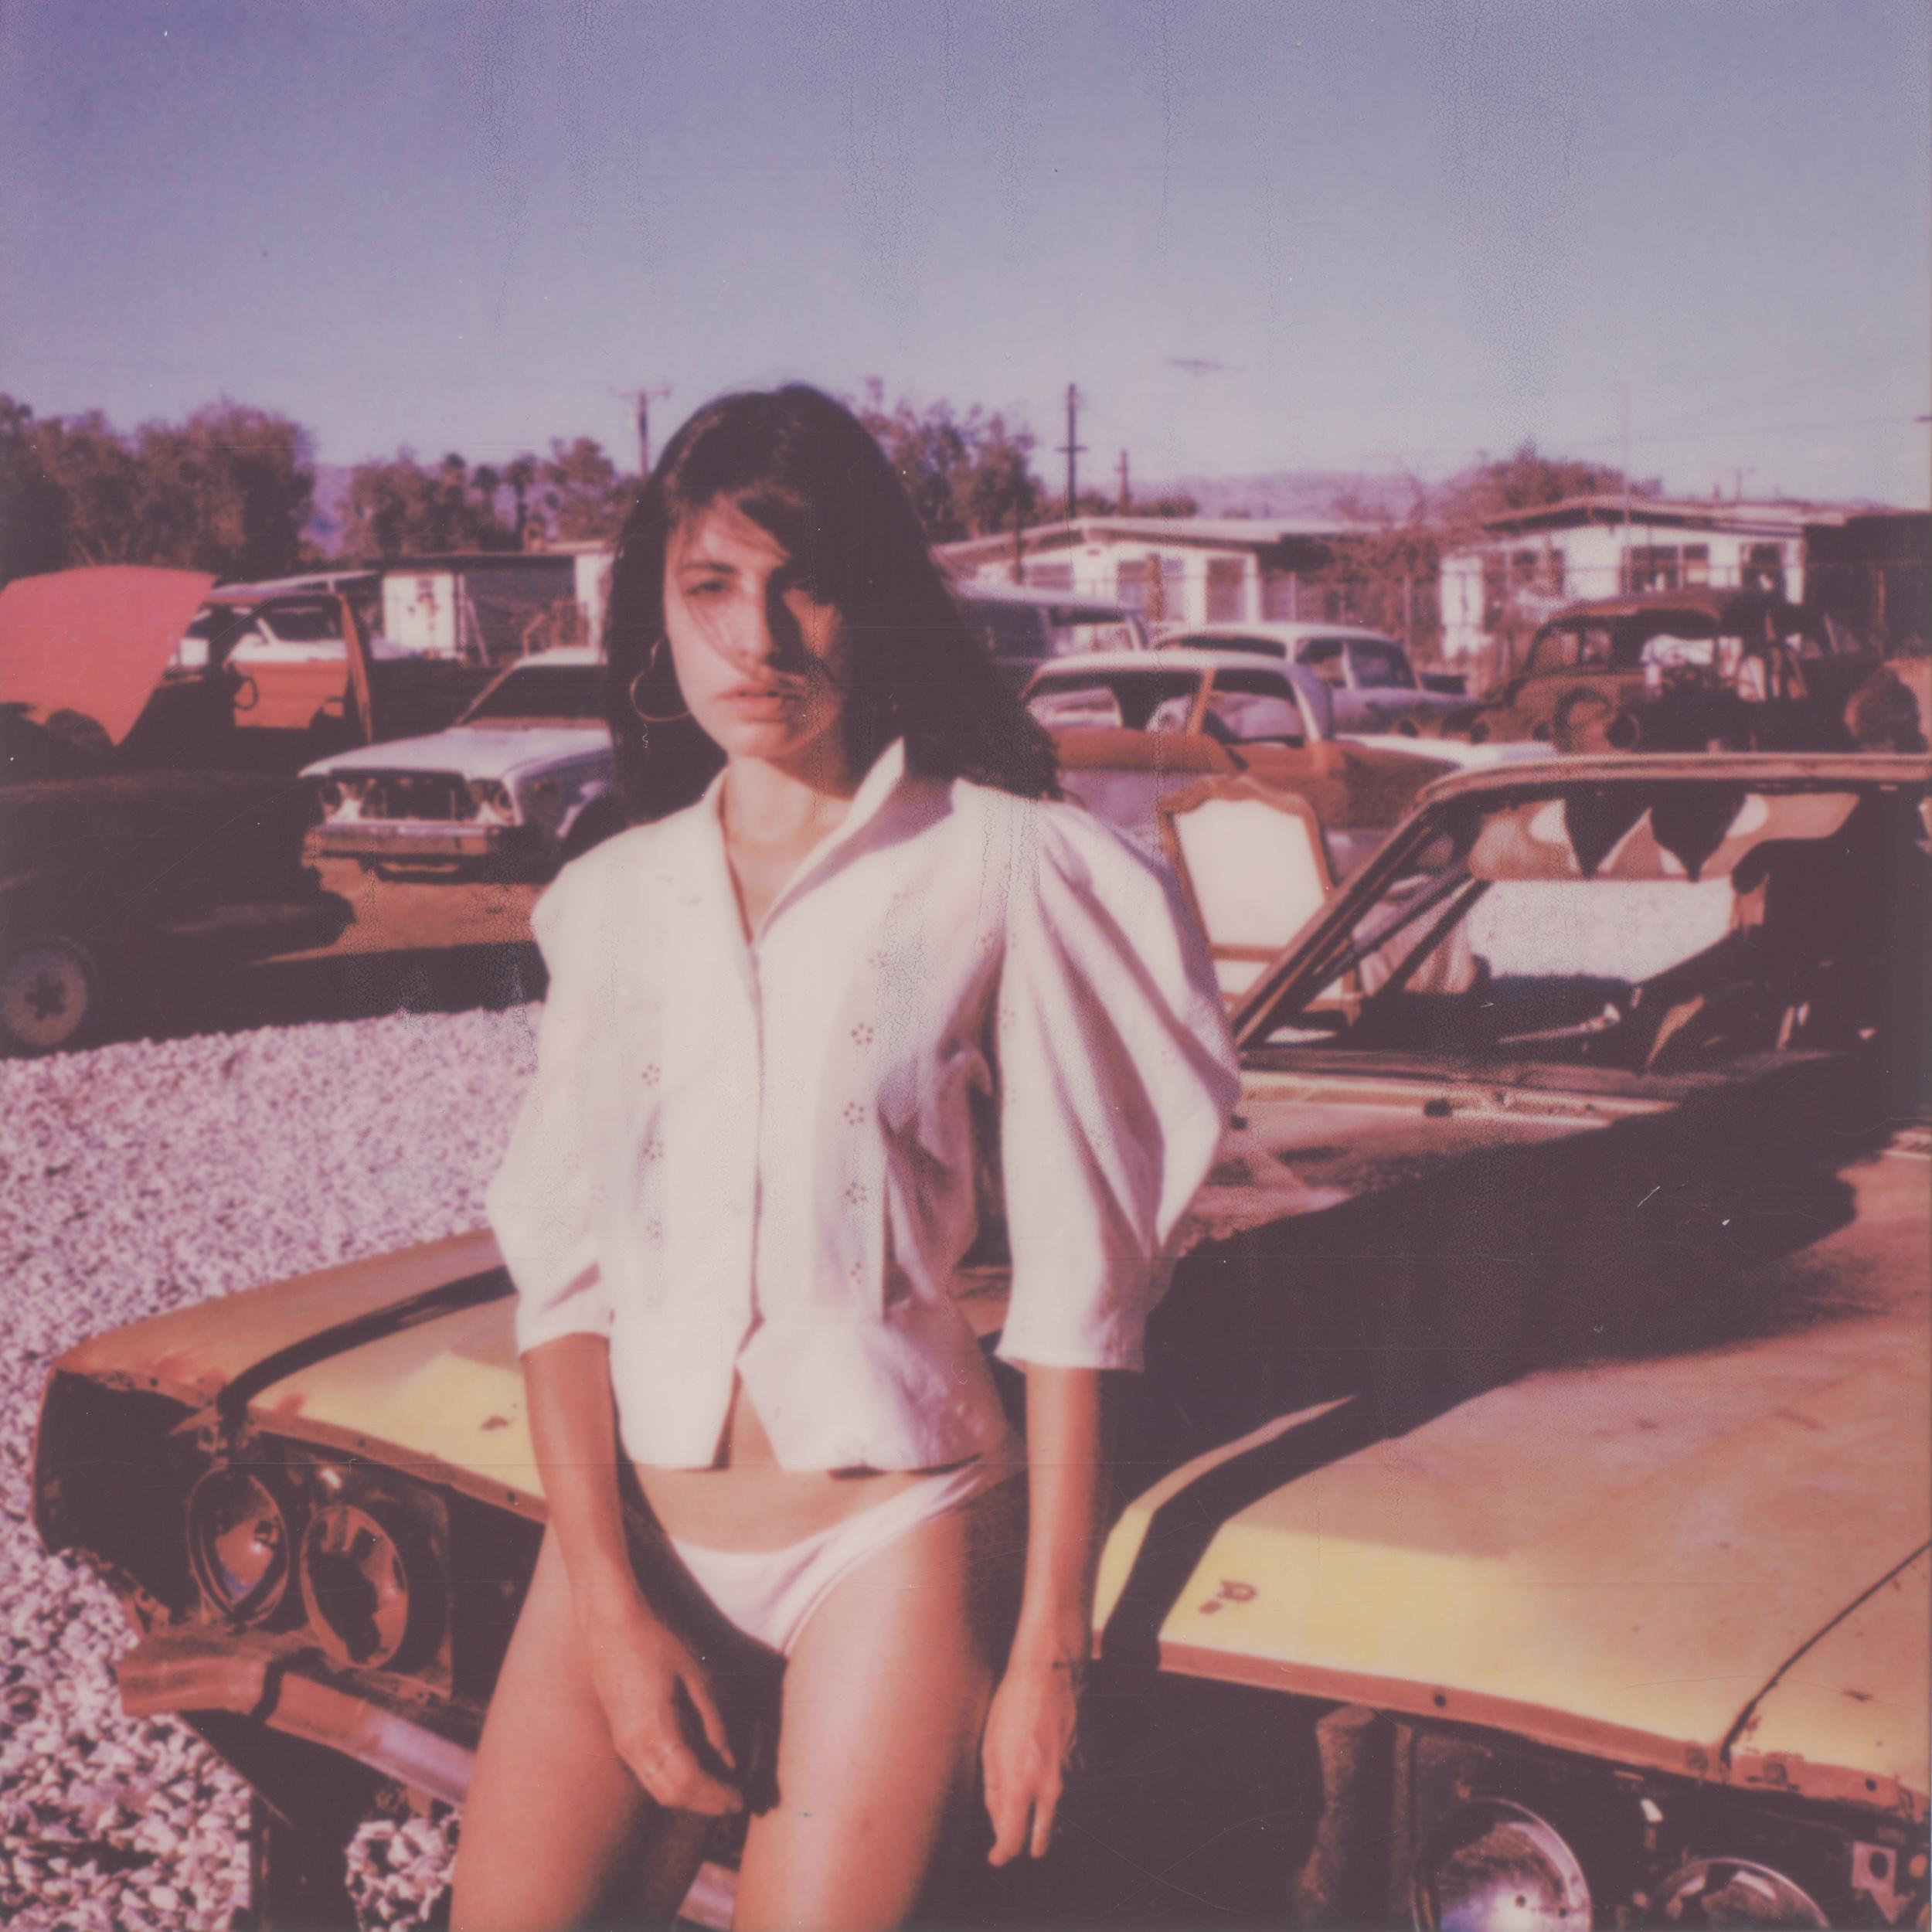 Baby you can drive my Car - Contemporary, Polaroid, nu, couleur